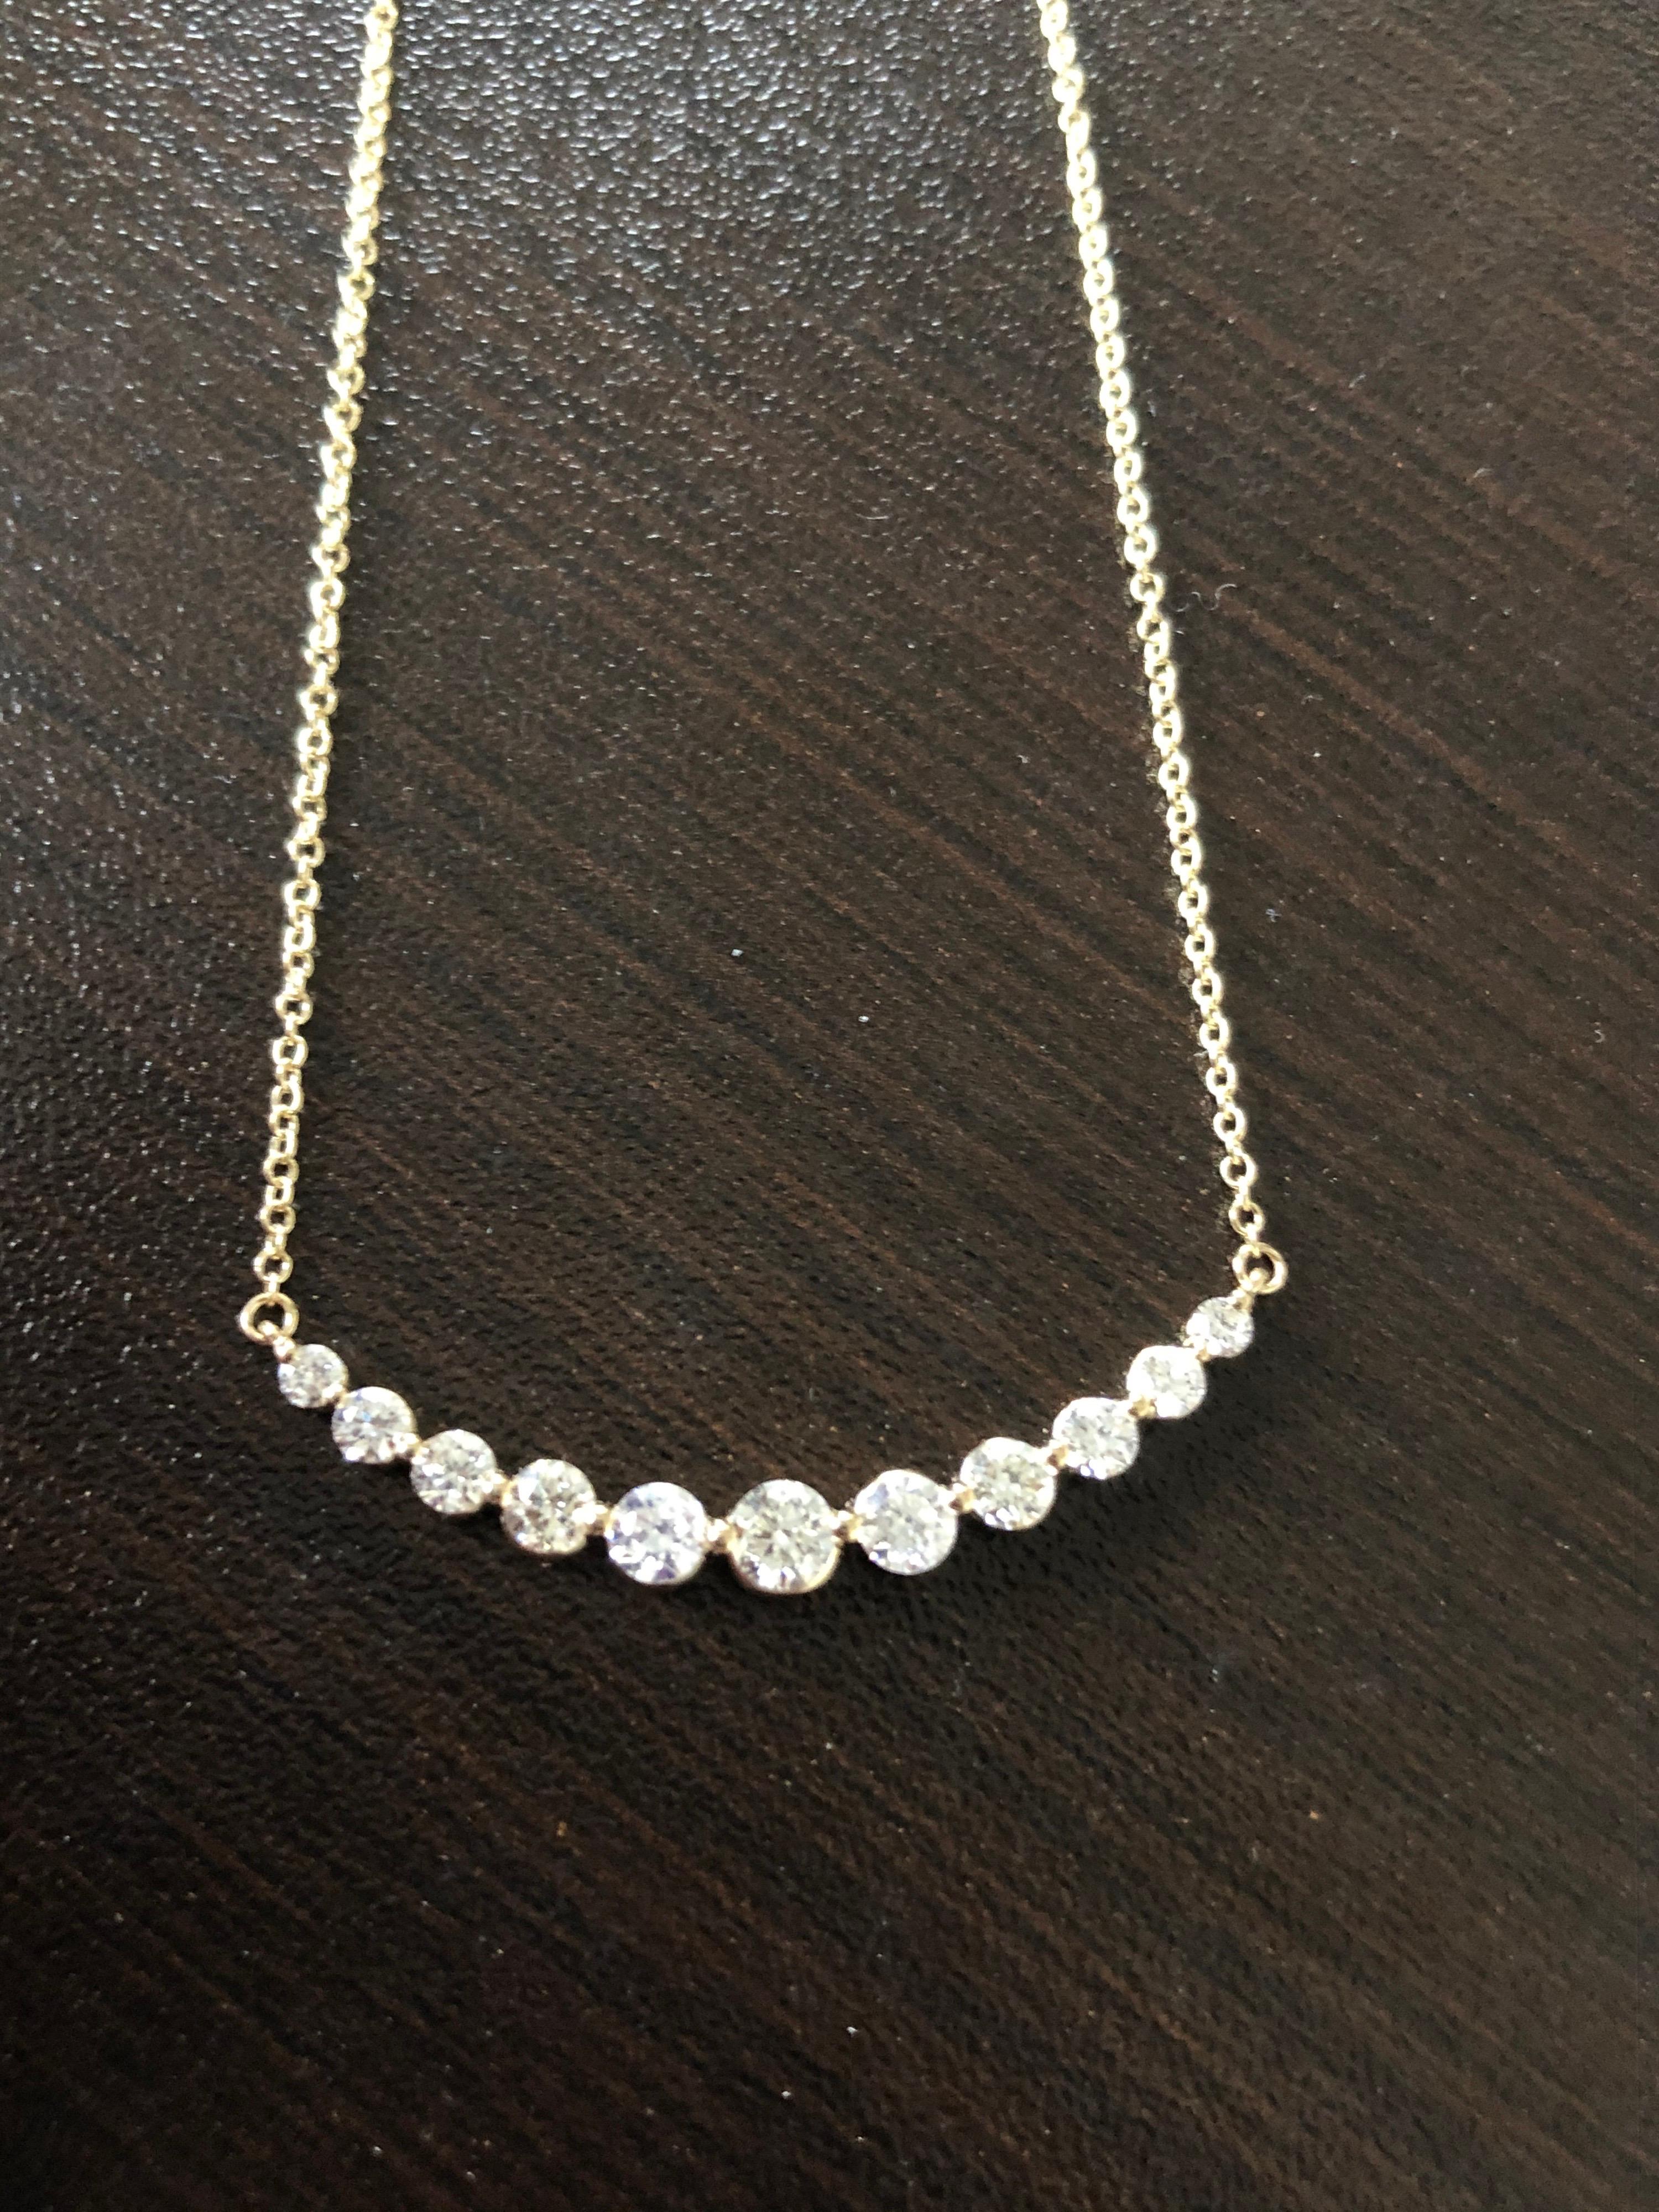 Diamond bar pendant set in 14K yellow gold. The total carat weight of this pendant is 1.35. The center stone weighs 0.25 carats. The clarity of the stones are SI, the color is G-H. This pendant is available in white gold. 